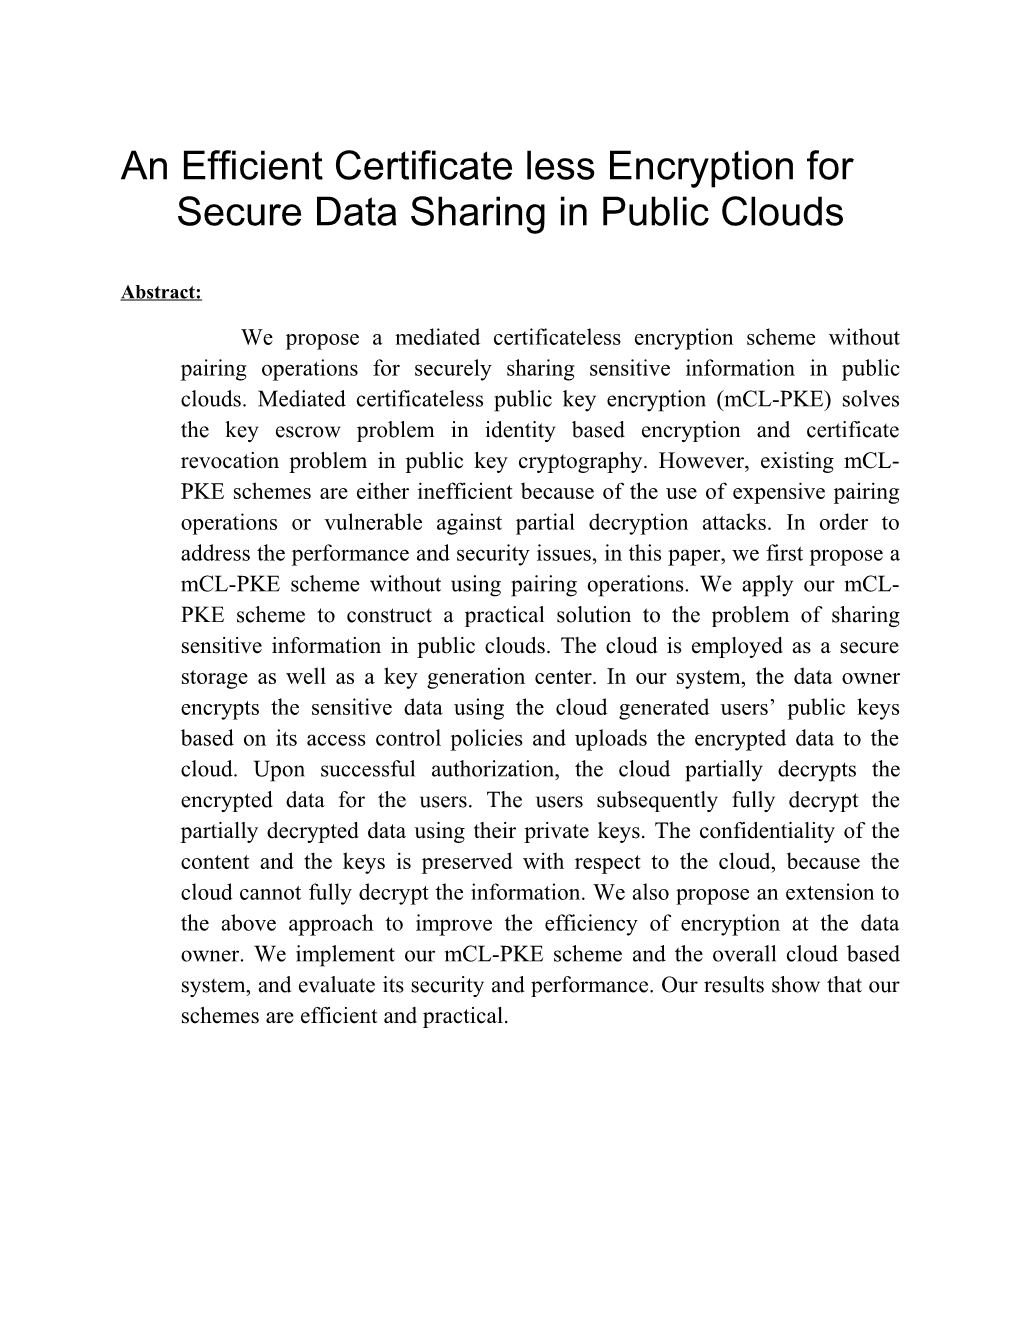 An Efficient Certificate Less Encryption For